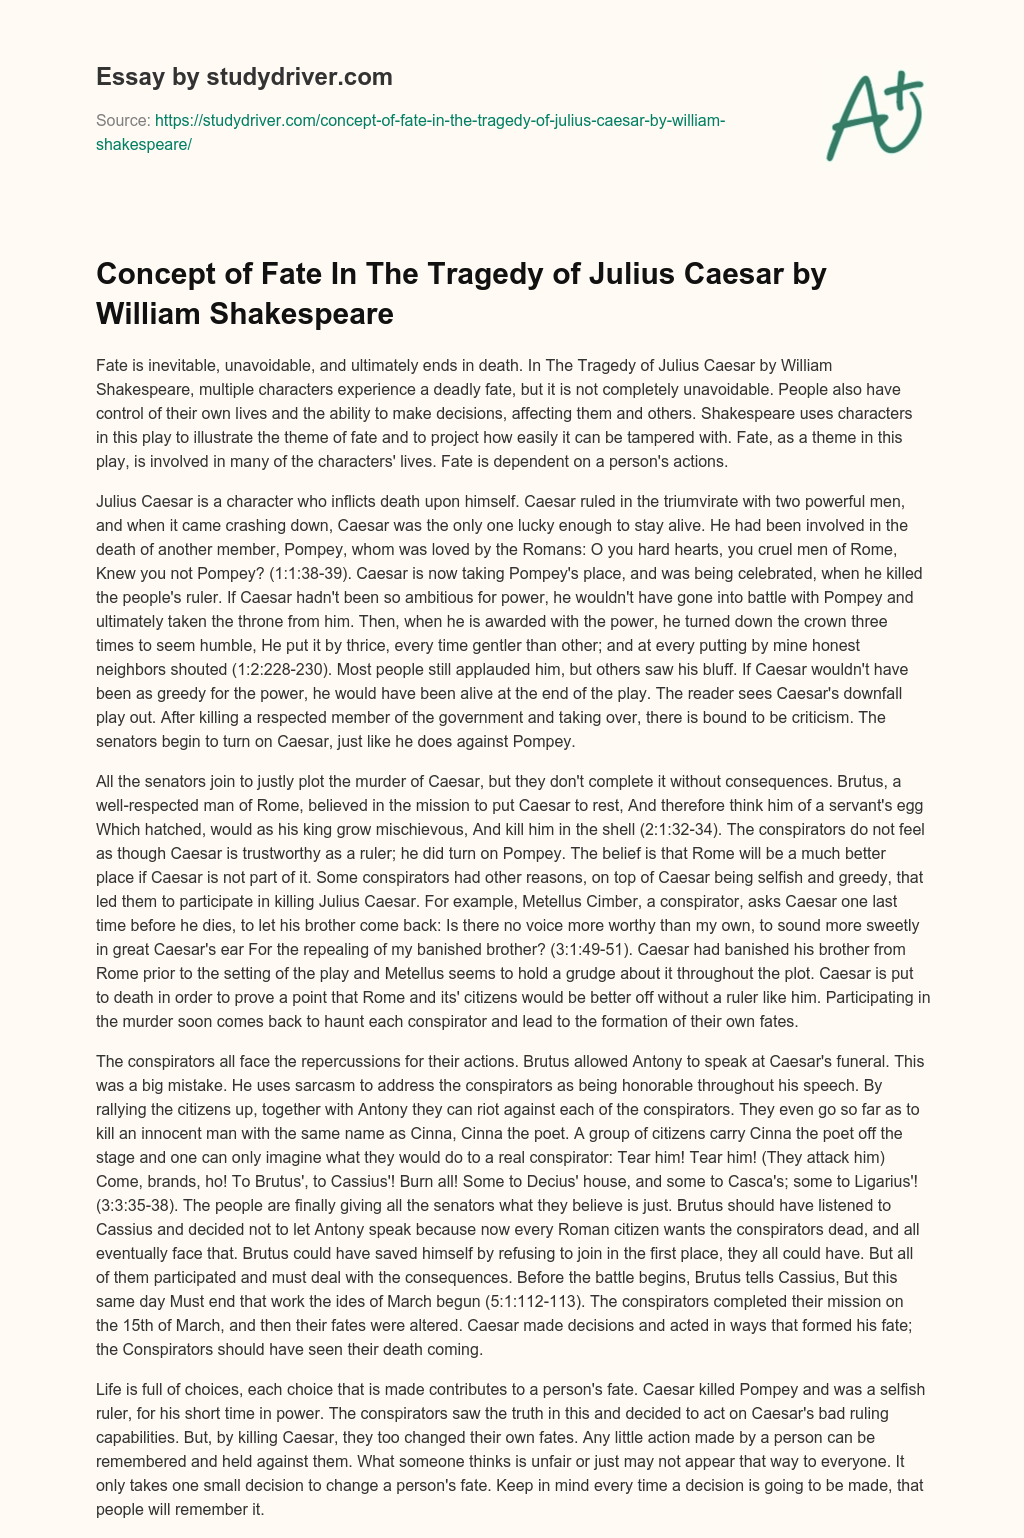 Concept of Fate in the Tragedy of Julius Caesar by William Shakespeare essay